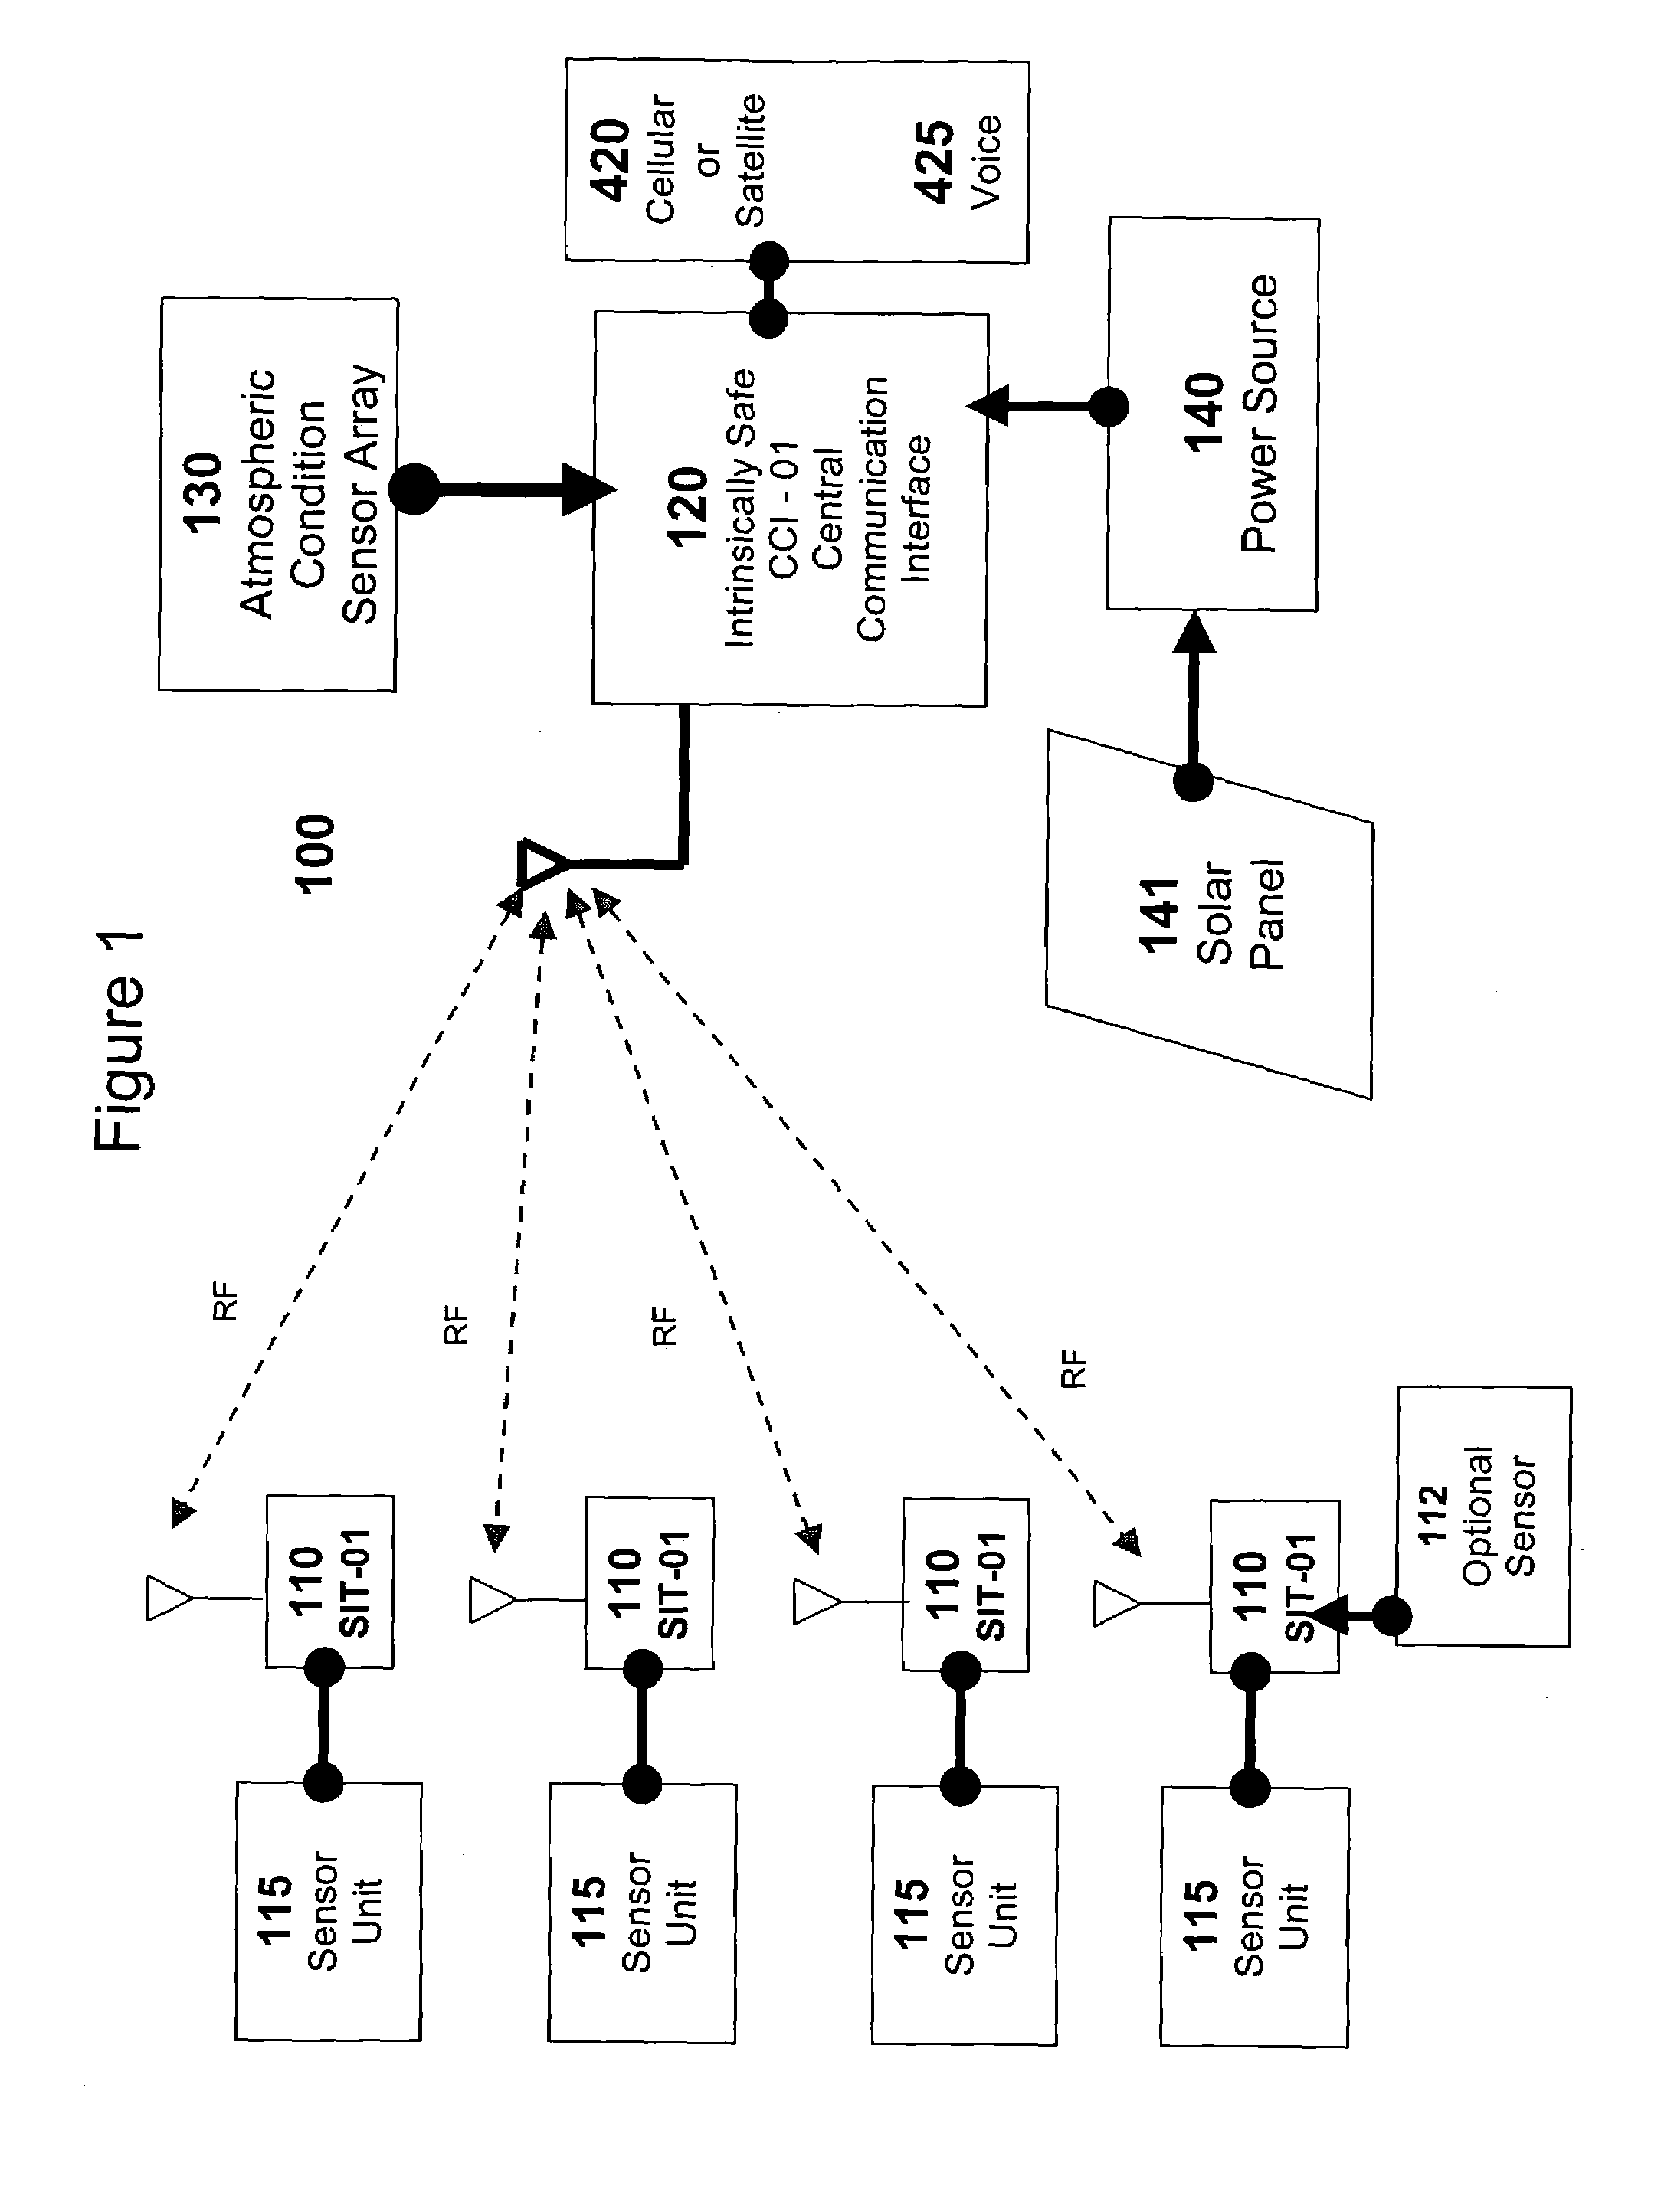 Apparatus system and method for gas well site monitoring